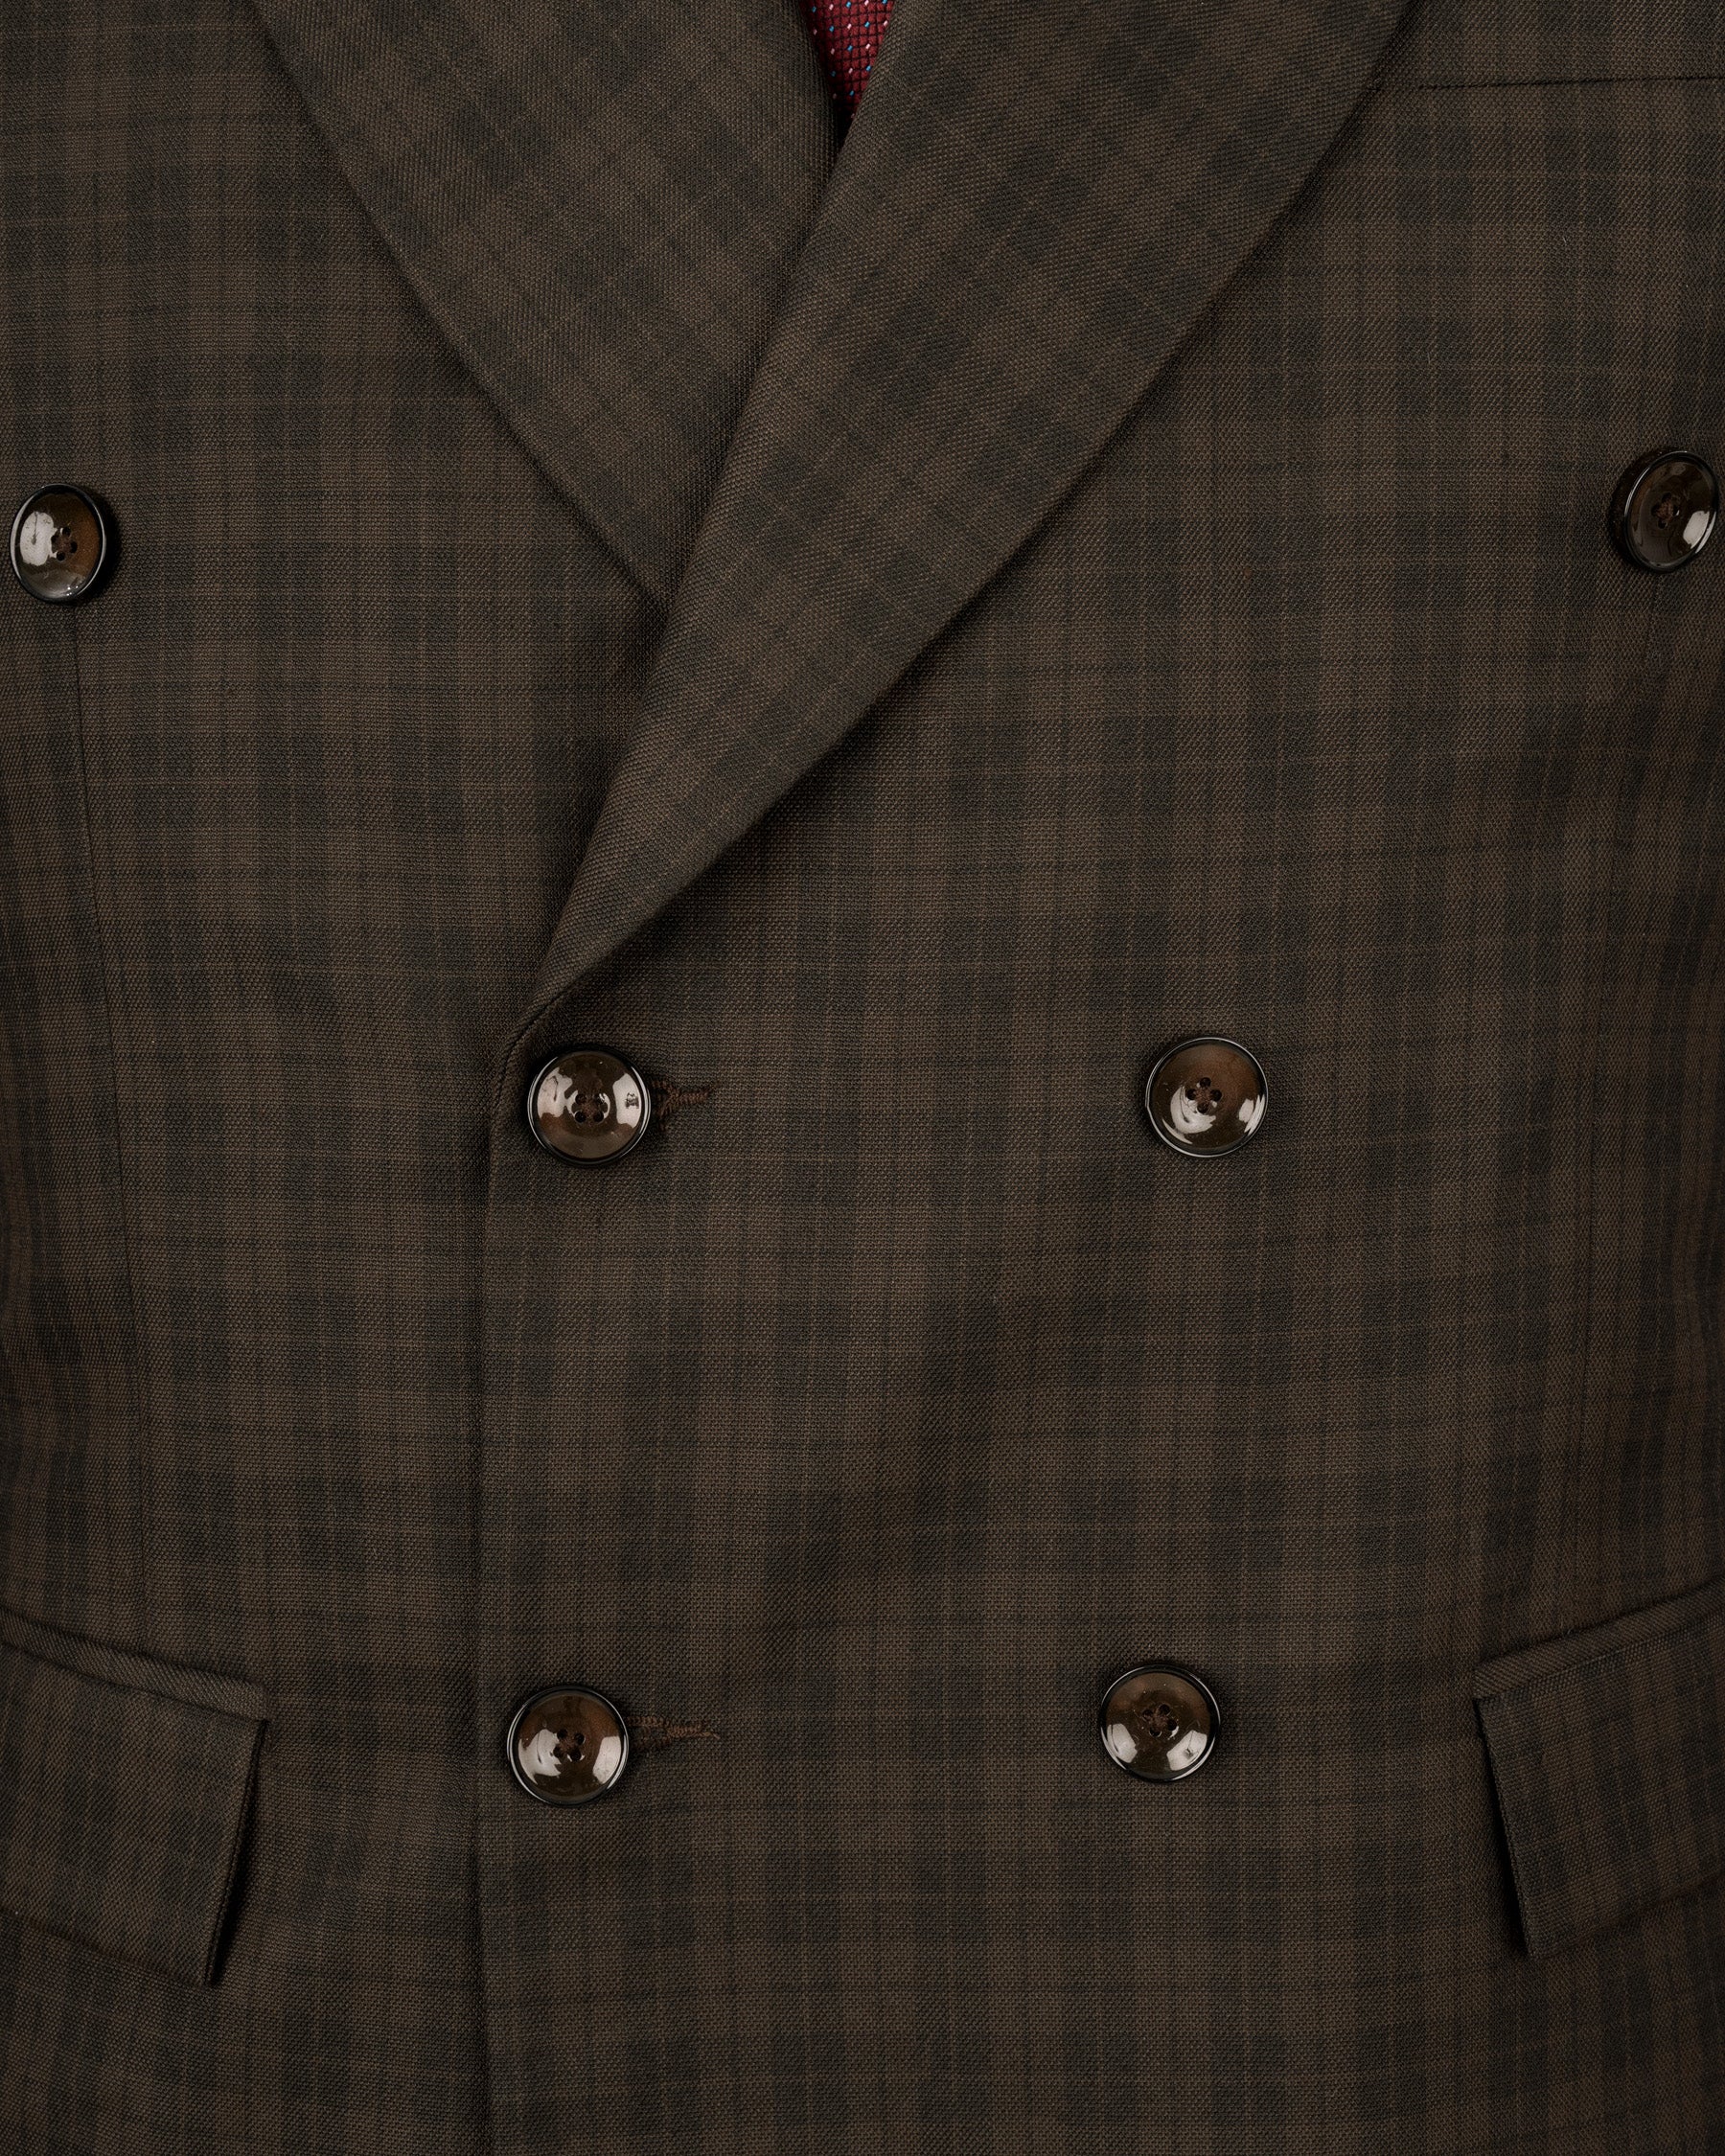 Armadillo Brown Plaid Double-breasted Blazer BL1755-DB-36,BL1755-DB-38,BL1755-DB-40,BL1755-DB-42,BL1755-DB-44,BL1755-DB-46,BL1755-DB-48,BL1755-DB-50,BL1755-DB-52,BL1755-DB-54,BL1755-DB-56,BL1755-DB-58,BL1755-DB-60